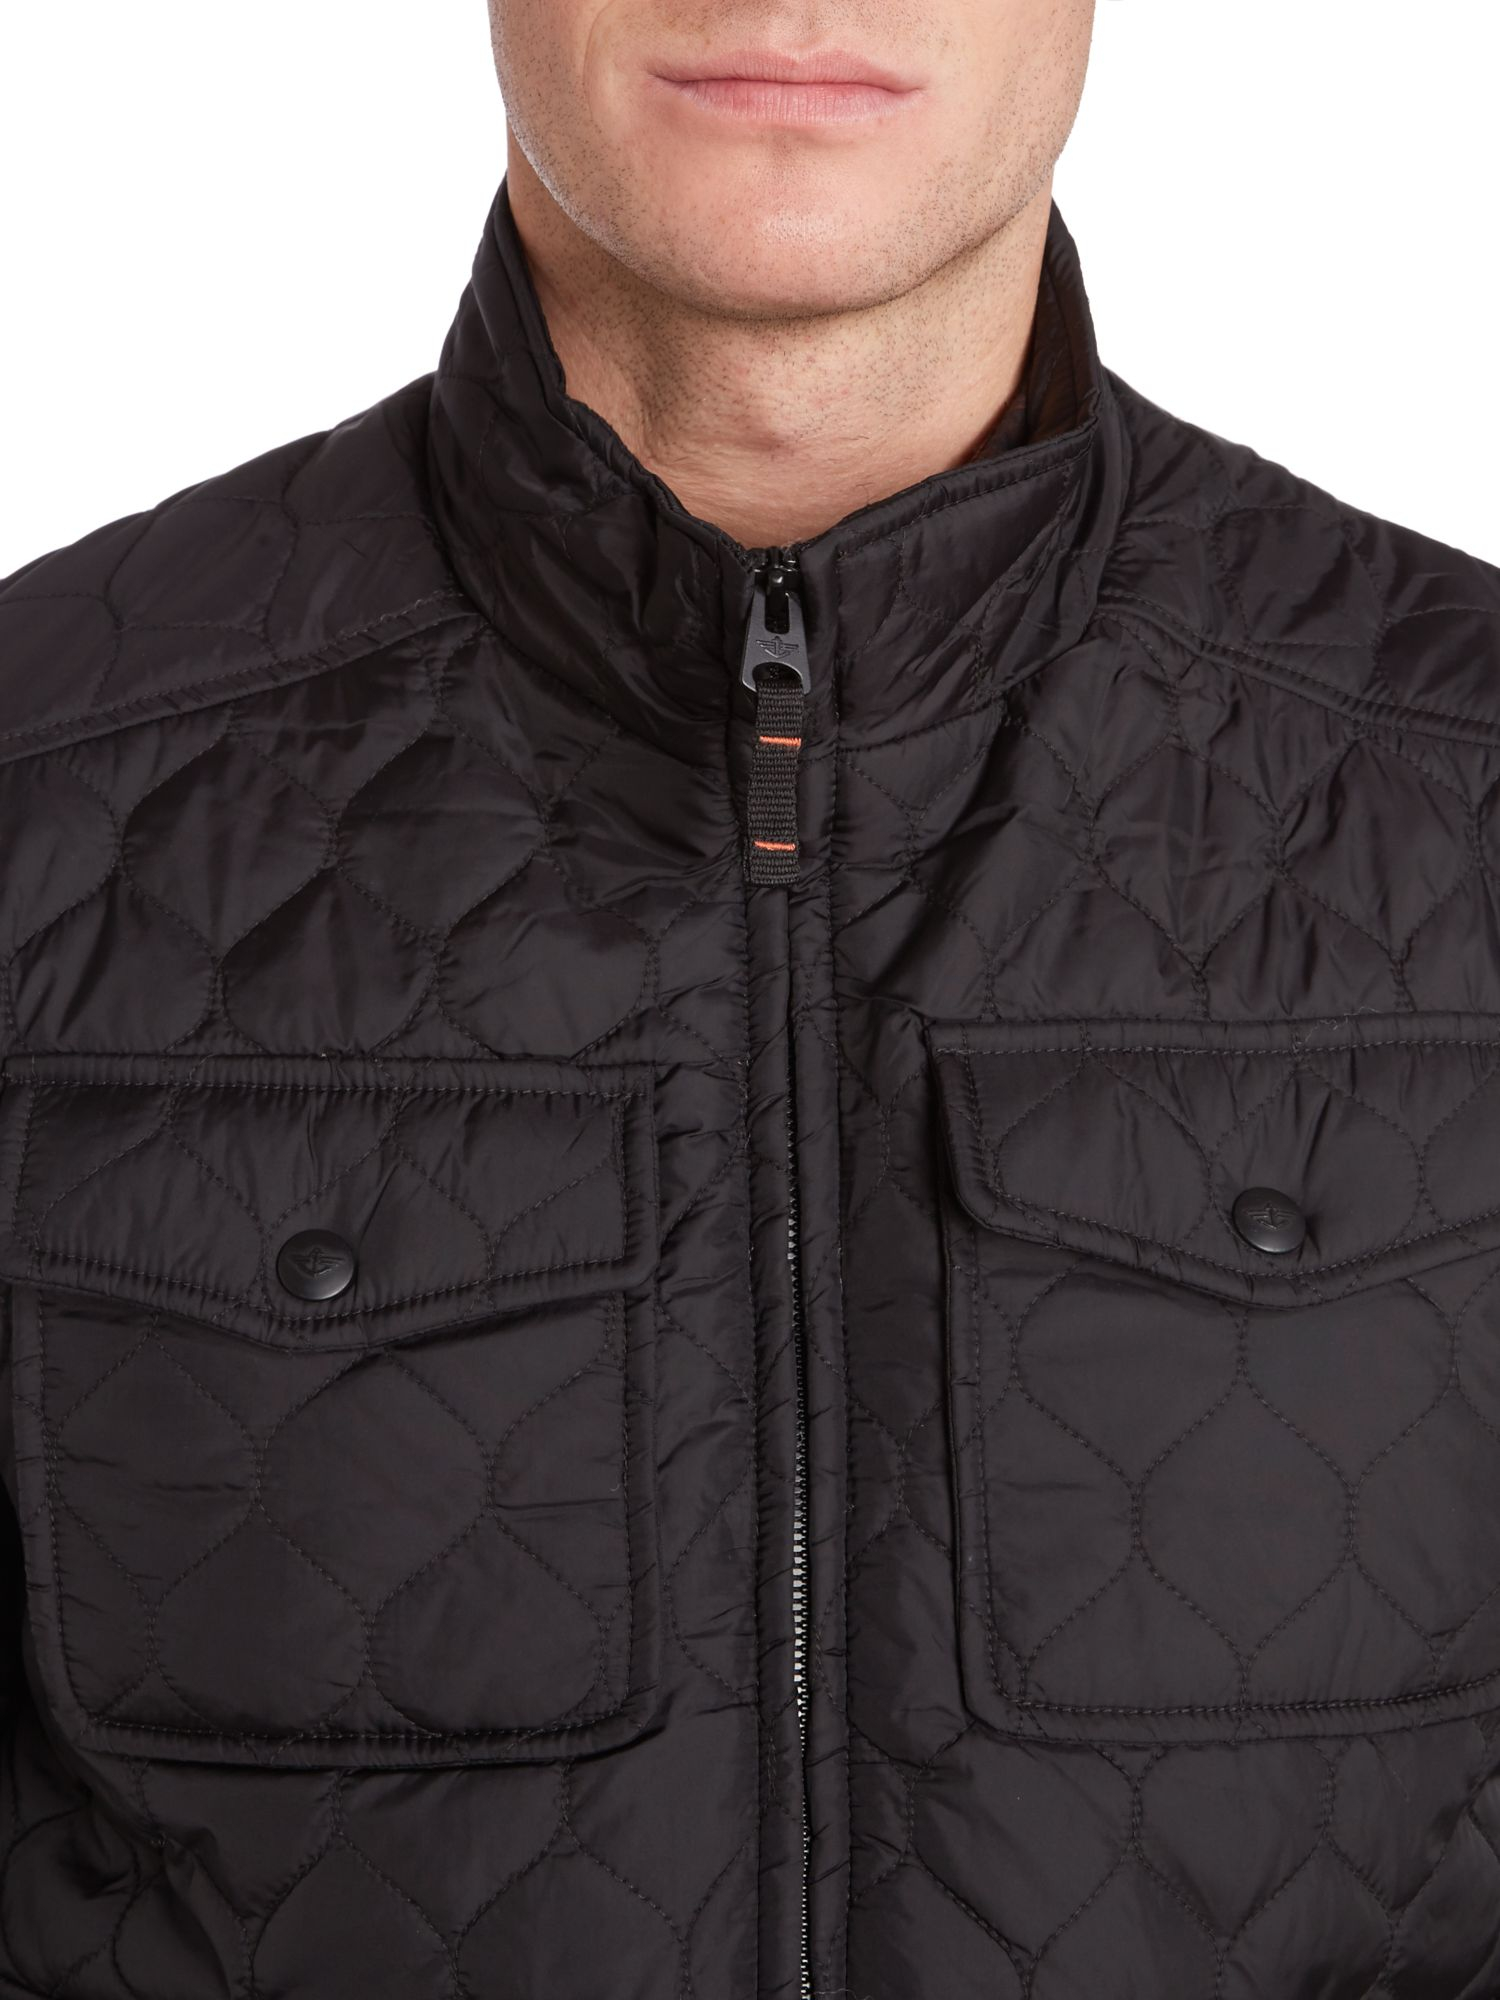 Dockers Quilted Bomber Jacket in Black for Men | Lyst